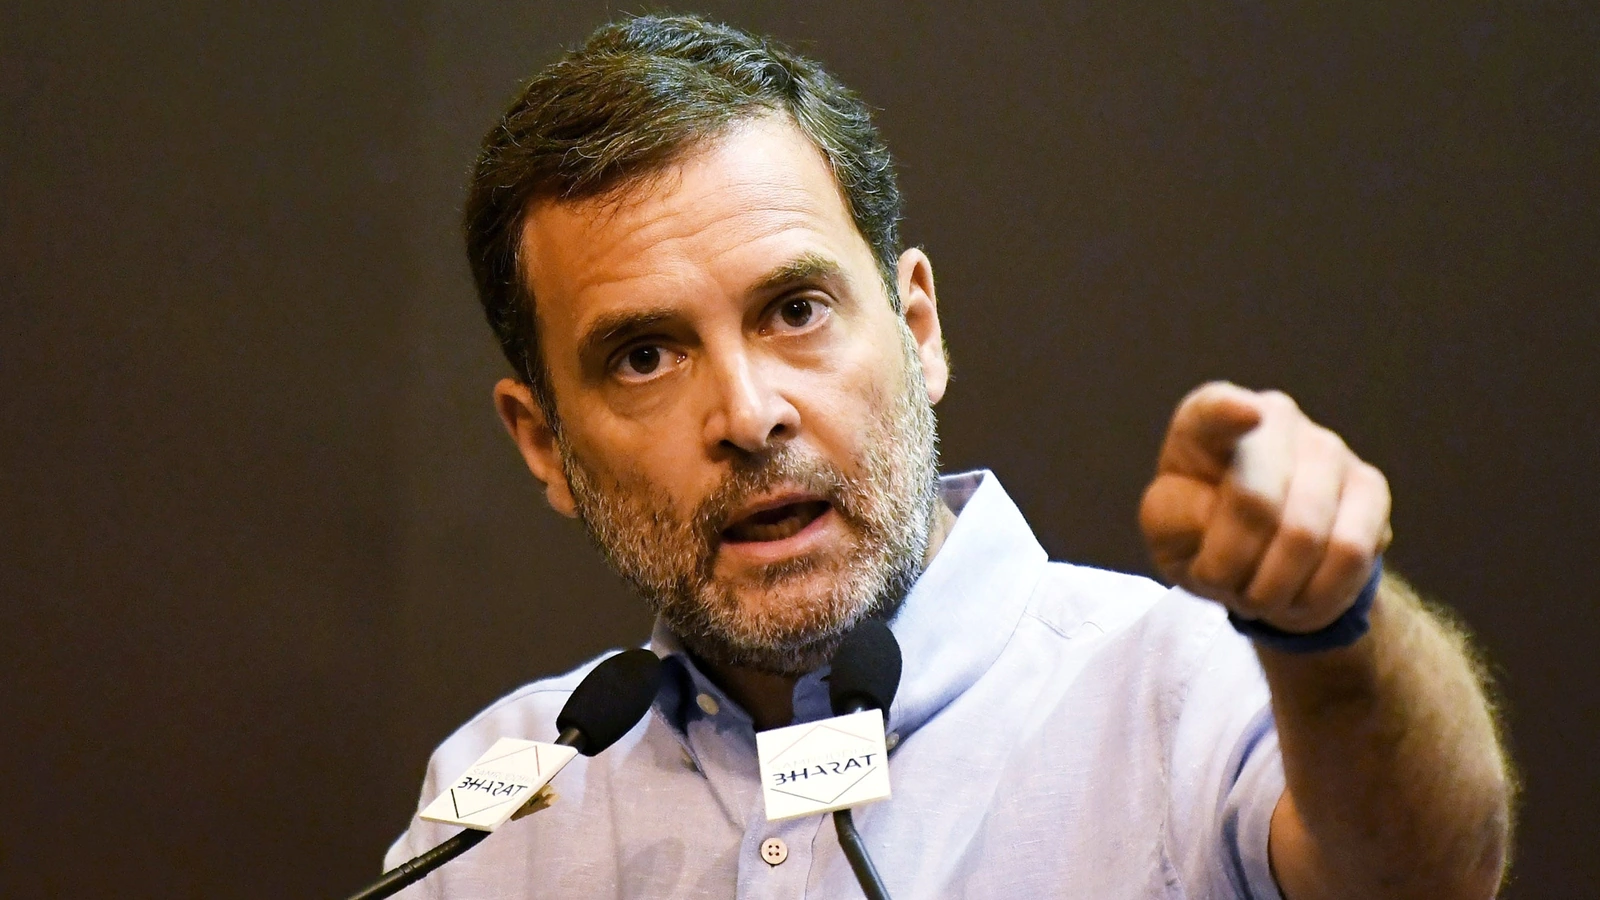 Rahul Gandhi on LPG price hike: ‘Only Congress governs for poor, middle class’